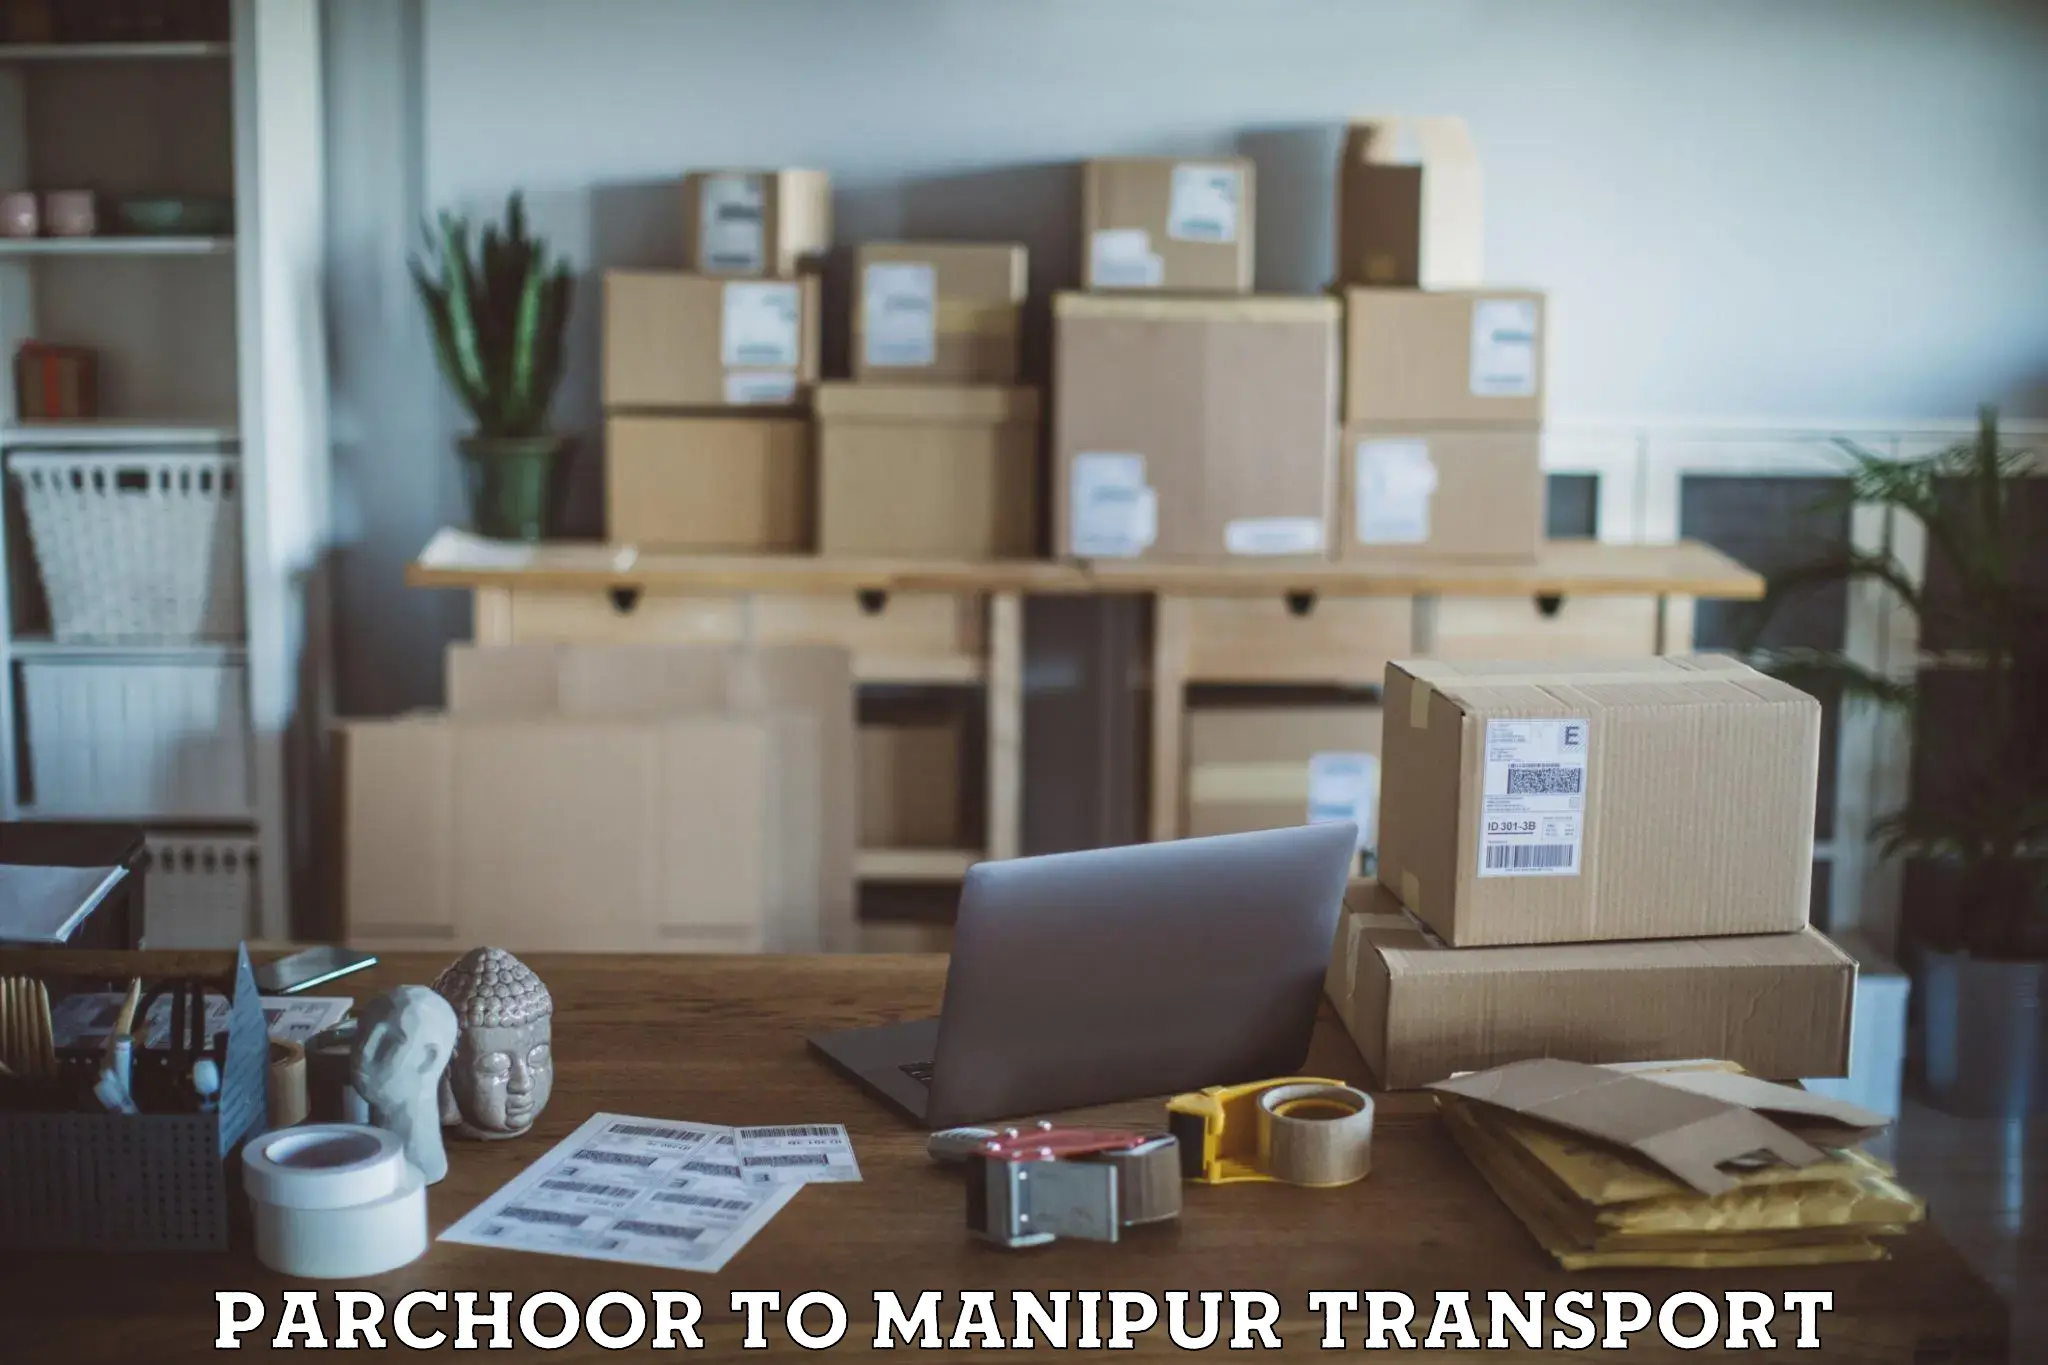 Bike shipping service Parchoor to Manipur